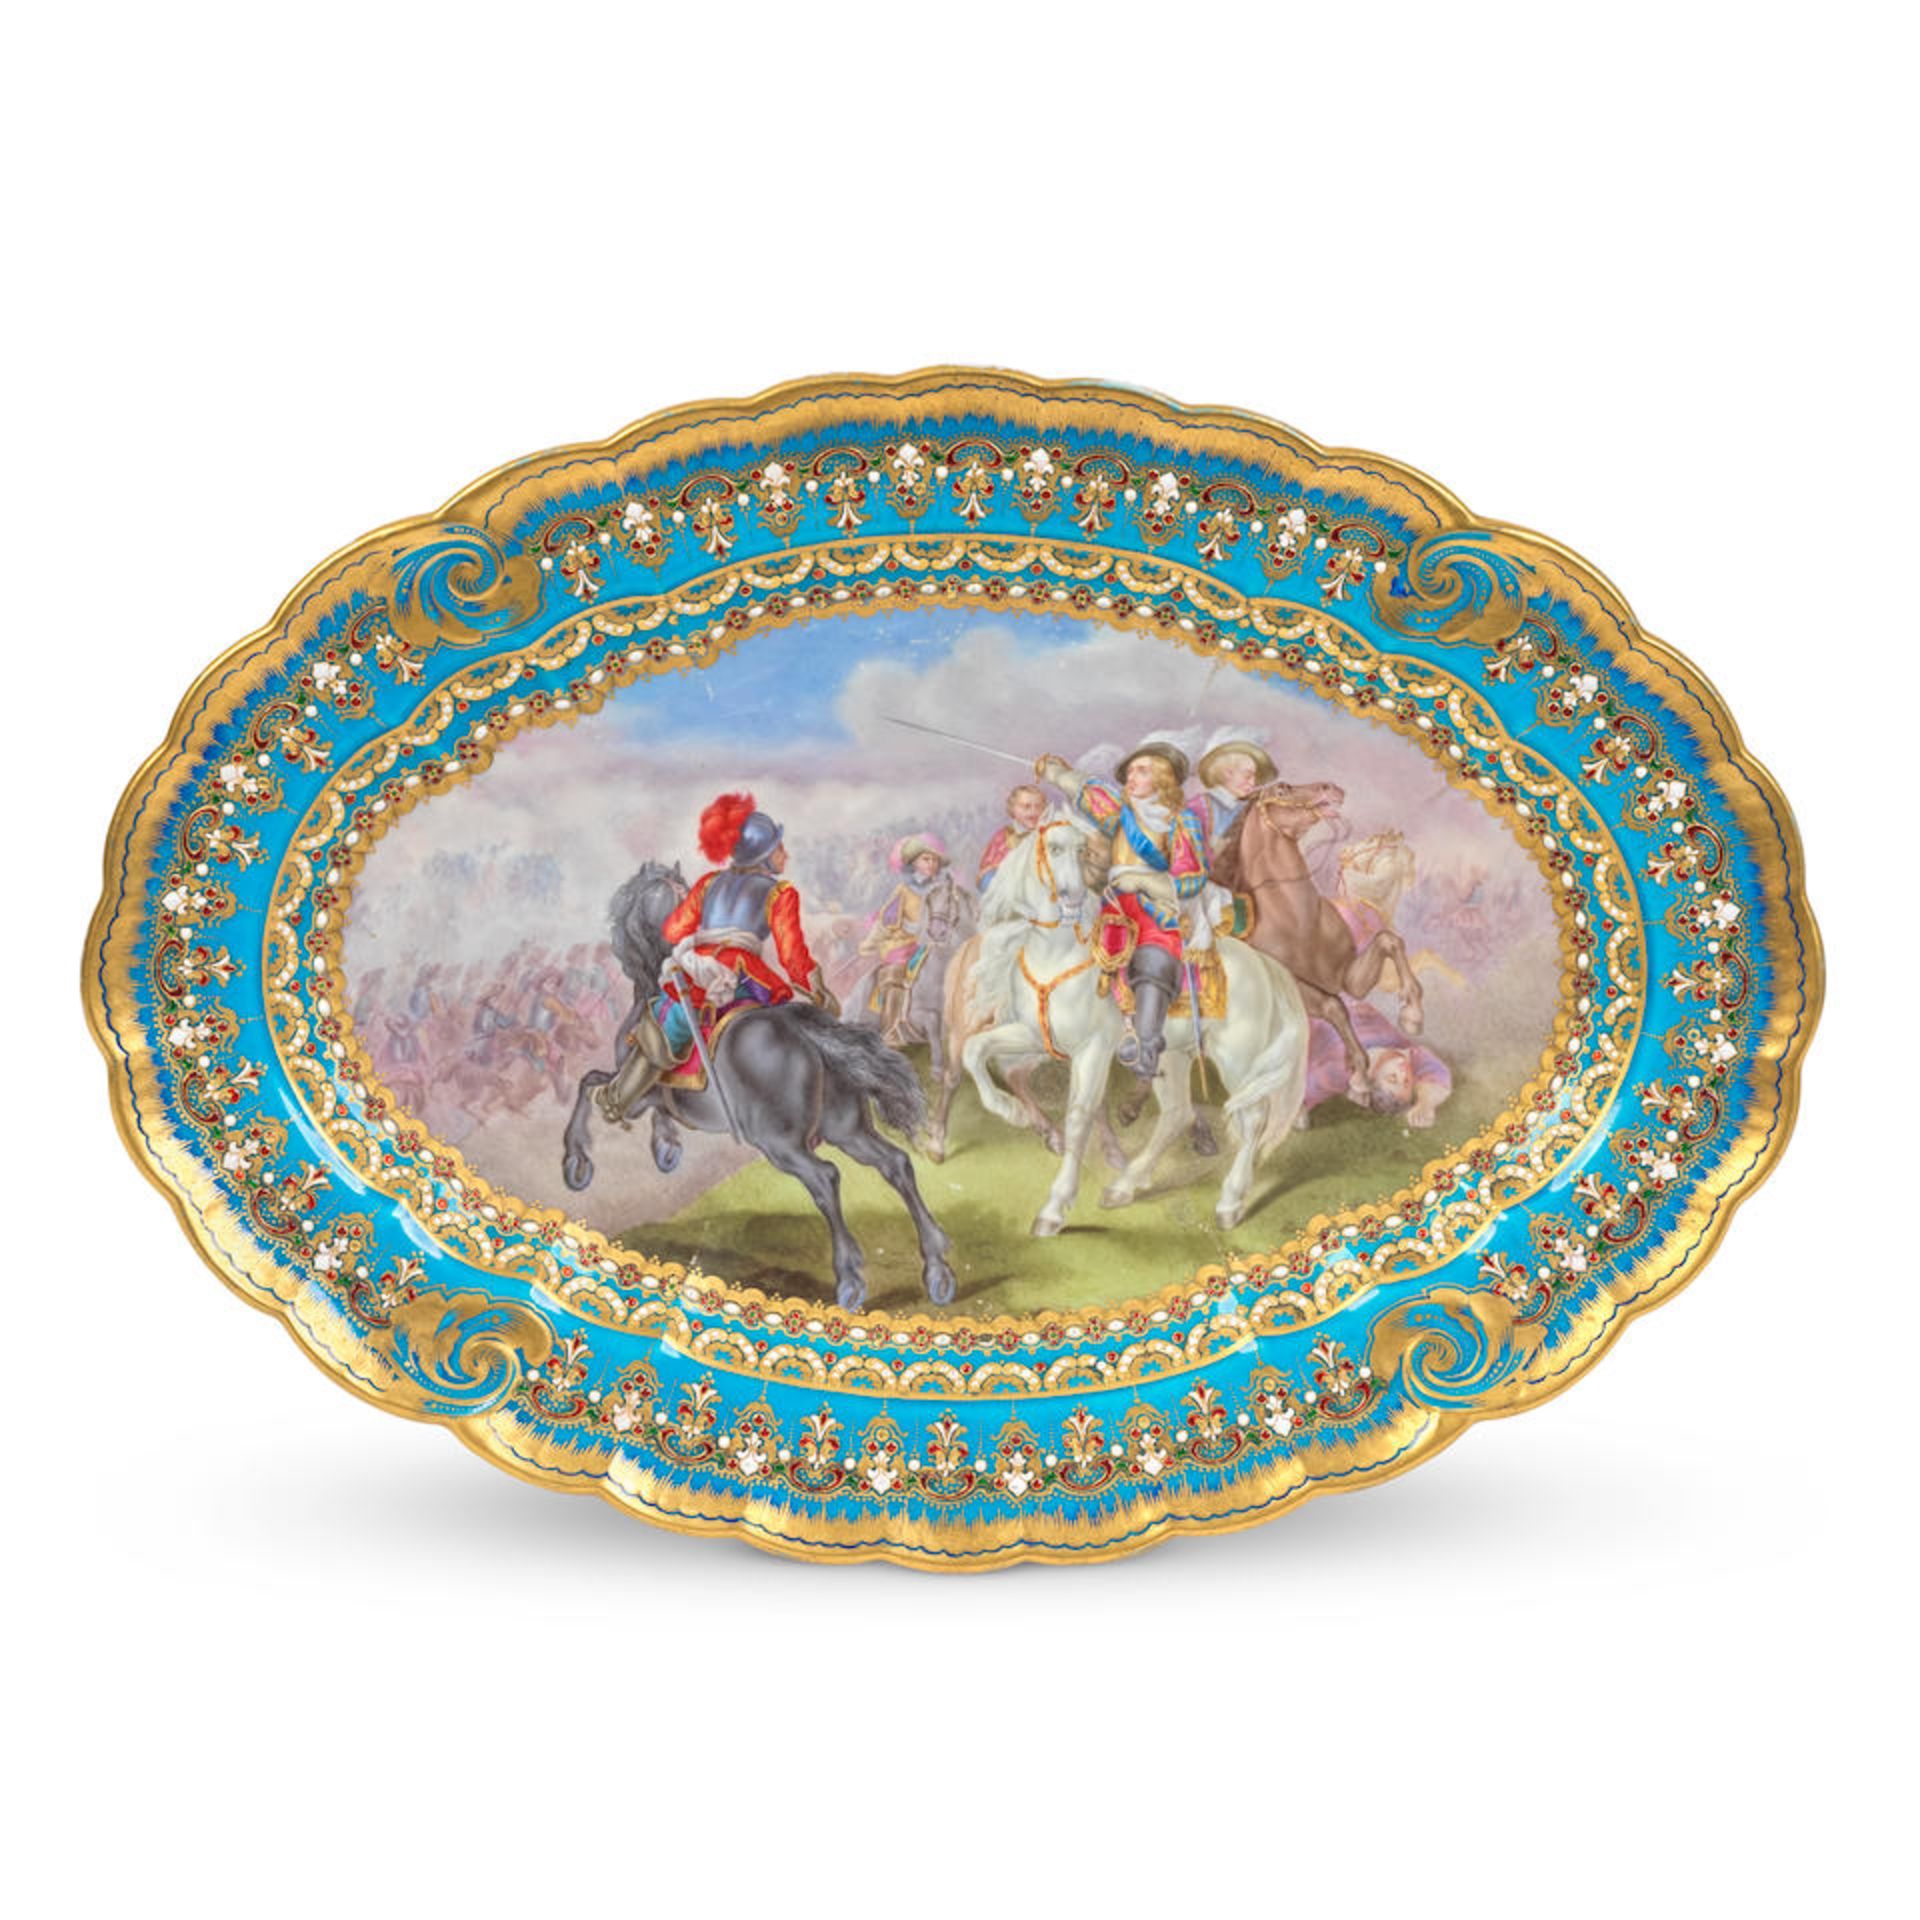 A late 19th century French 'jewelled' porcelain tray or dish in the Sèvres style